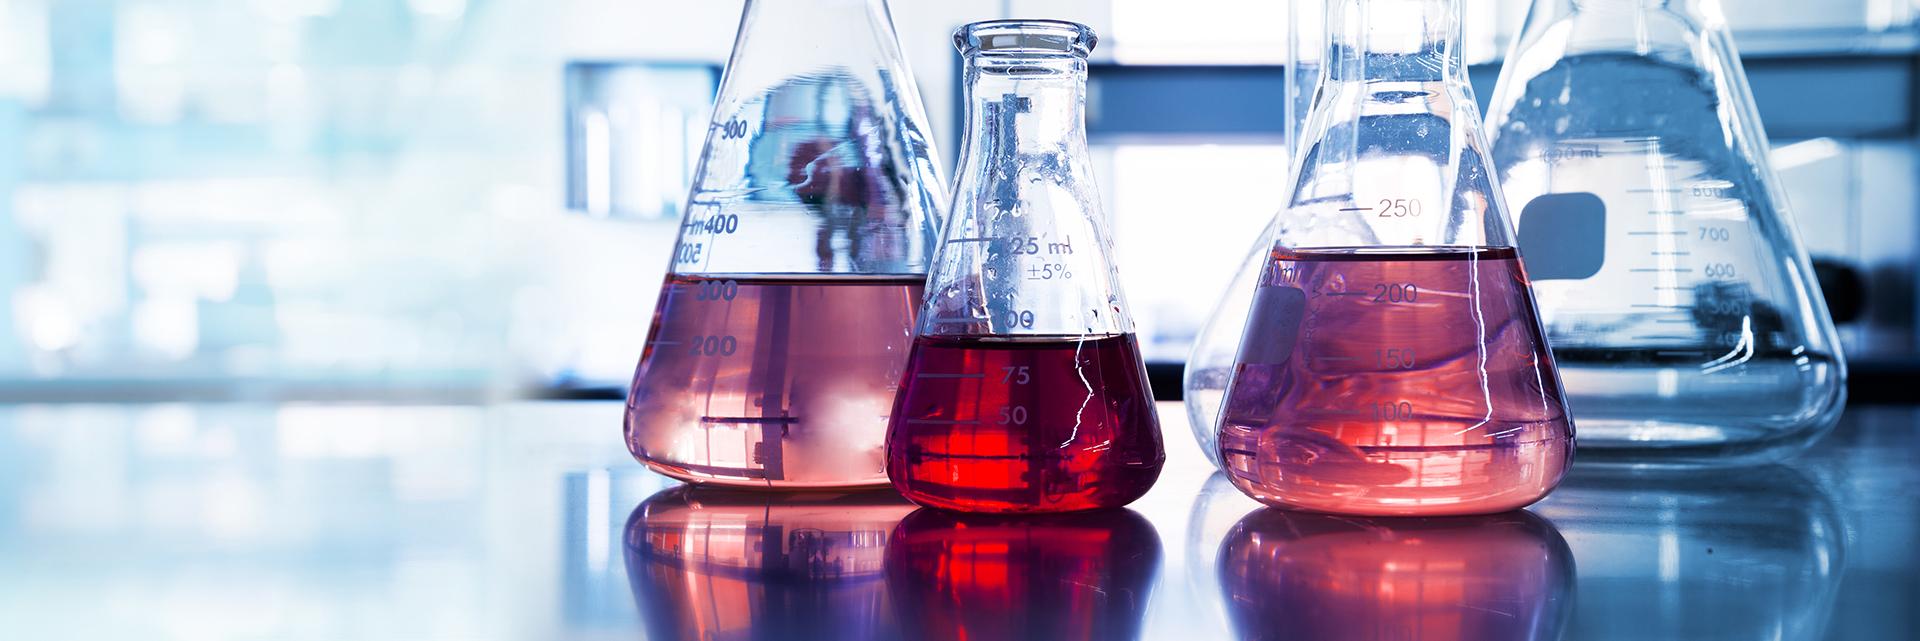 Two graduated Erlenmeyer flasks containing a red liquid